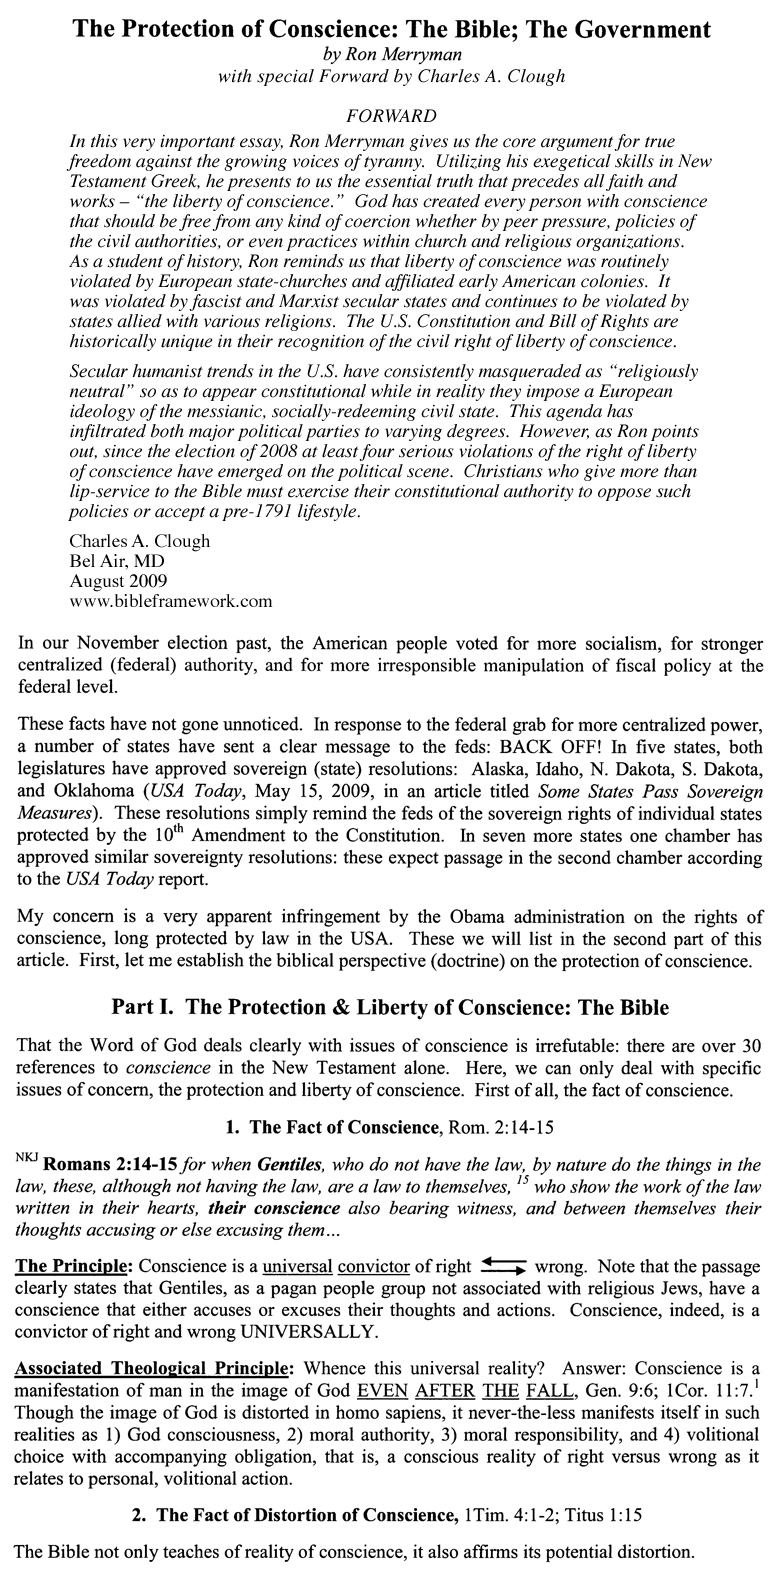 The Protection of Conscience: The Bible; The Government